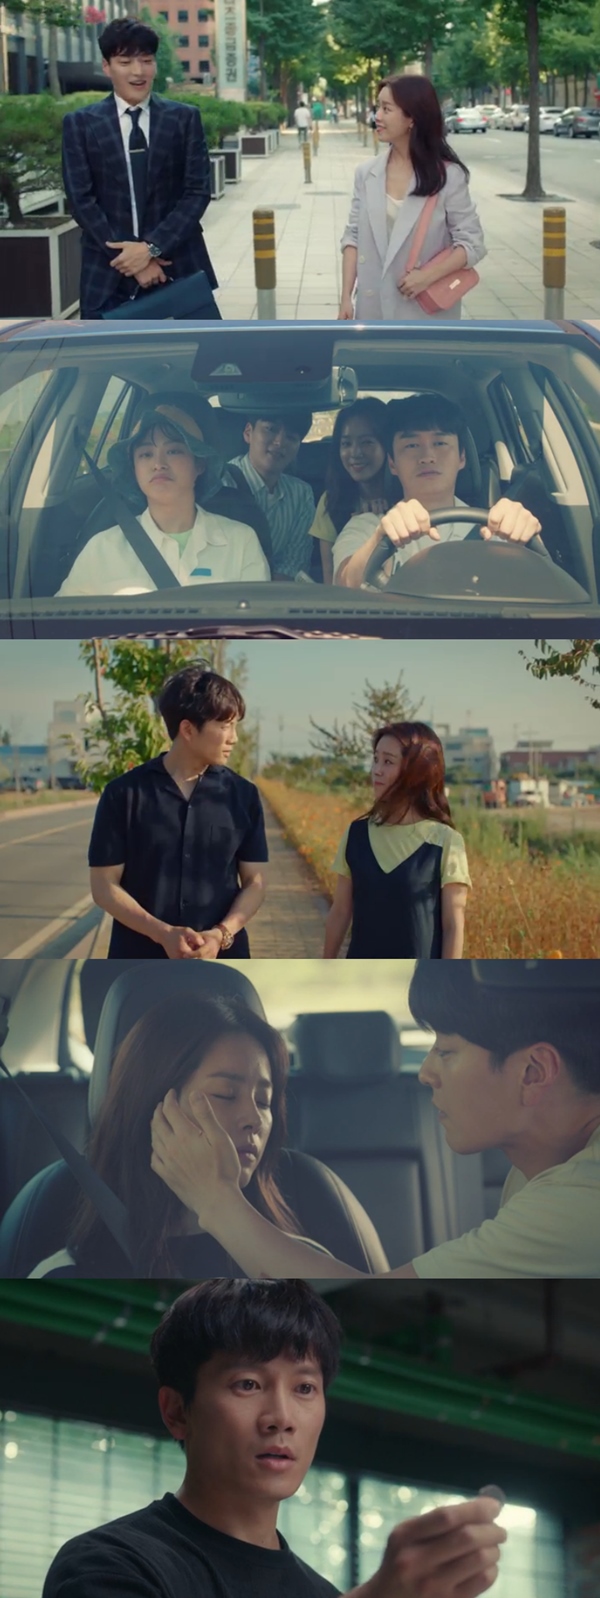 In the TVN drama Knowing Wife, which was broadcast on the 22nd, Ji Sung (Cha Joo-hyuk) was jealous of the love between Han Ji-min (Seo Woo-jin) and Jang Seung-jo (Yoon Jong-hu).Lee Jung-eun (Seo Woo-jin Mo) came to World Bank and called Ji Sung the car west.Lee thought of Ji Sung as Han Ji-mins husband and remembered the past accurately before it changed.Ji Sung was haunted by guilt when he found out that Han Ji-min relied heavily on him when he lost his father.Han Ji-min surprised Ji Sung by telling Ji Sung, Is not it my mothers son-in-law in my past life?Han Ji-min and Jang Seung-jo started dating, with Han Ji-min saying: My heart is not 100.But I think he is a good man. Ji Sung, who was caught up in a complicated feeling and recalled memories with Han Ji-min in search of school.Oh Ui-sik (Oh Sang-sik) Park Hee-bon (Cha Ju-eun) proposed a couples companion Travel.Ji Sung and Kang Han-Na (Lee Hye-won) Han Ji-min Jang Seung-jo went on a travel trip together to the pension.Kang Han-Na overdone by checking Han Ji-min; Han Ji-min fell late at night with a high fever.Ji Sung ran around the neighborhood and tried to get the medicine, but Jang Seung-jo took him to the emergency room.Ji Sung was relieved to see Han Ji-min and Jang Seung-jos affectionate appearance; he did not speak to Kang Han-Na throughout his return to Seoul.After breaking up with Kang Han-Na, Ji Sung searched for World Bank for 500 won coins and found 500 won coins in 2006.I wonder if Ji Sungs plan to change the past and become obsessed with guilt and jealousy will succeed.But viewers are cheering for Han Ji-min to continue with Jang Seung-jo.Viewers are responding to what good would it be if Ji Sung returned to the past unless he changed.